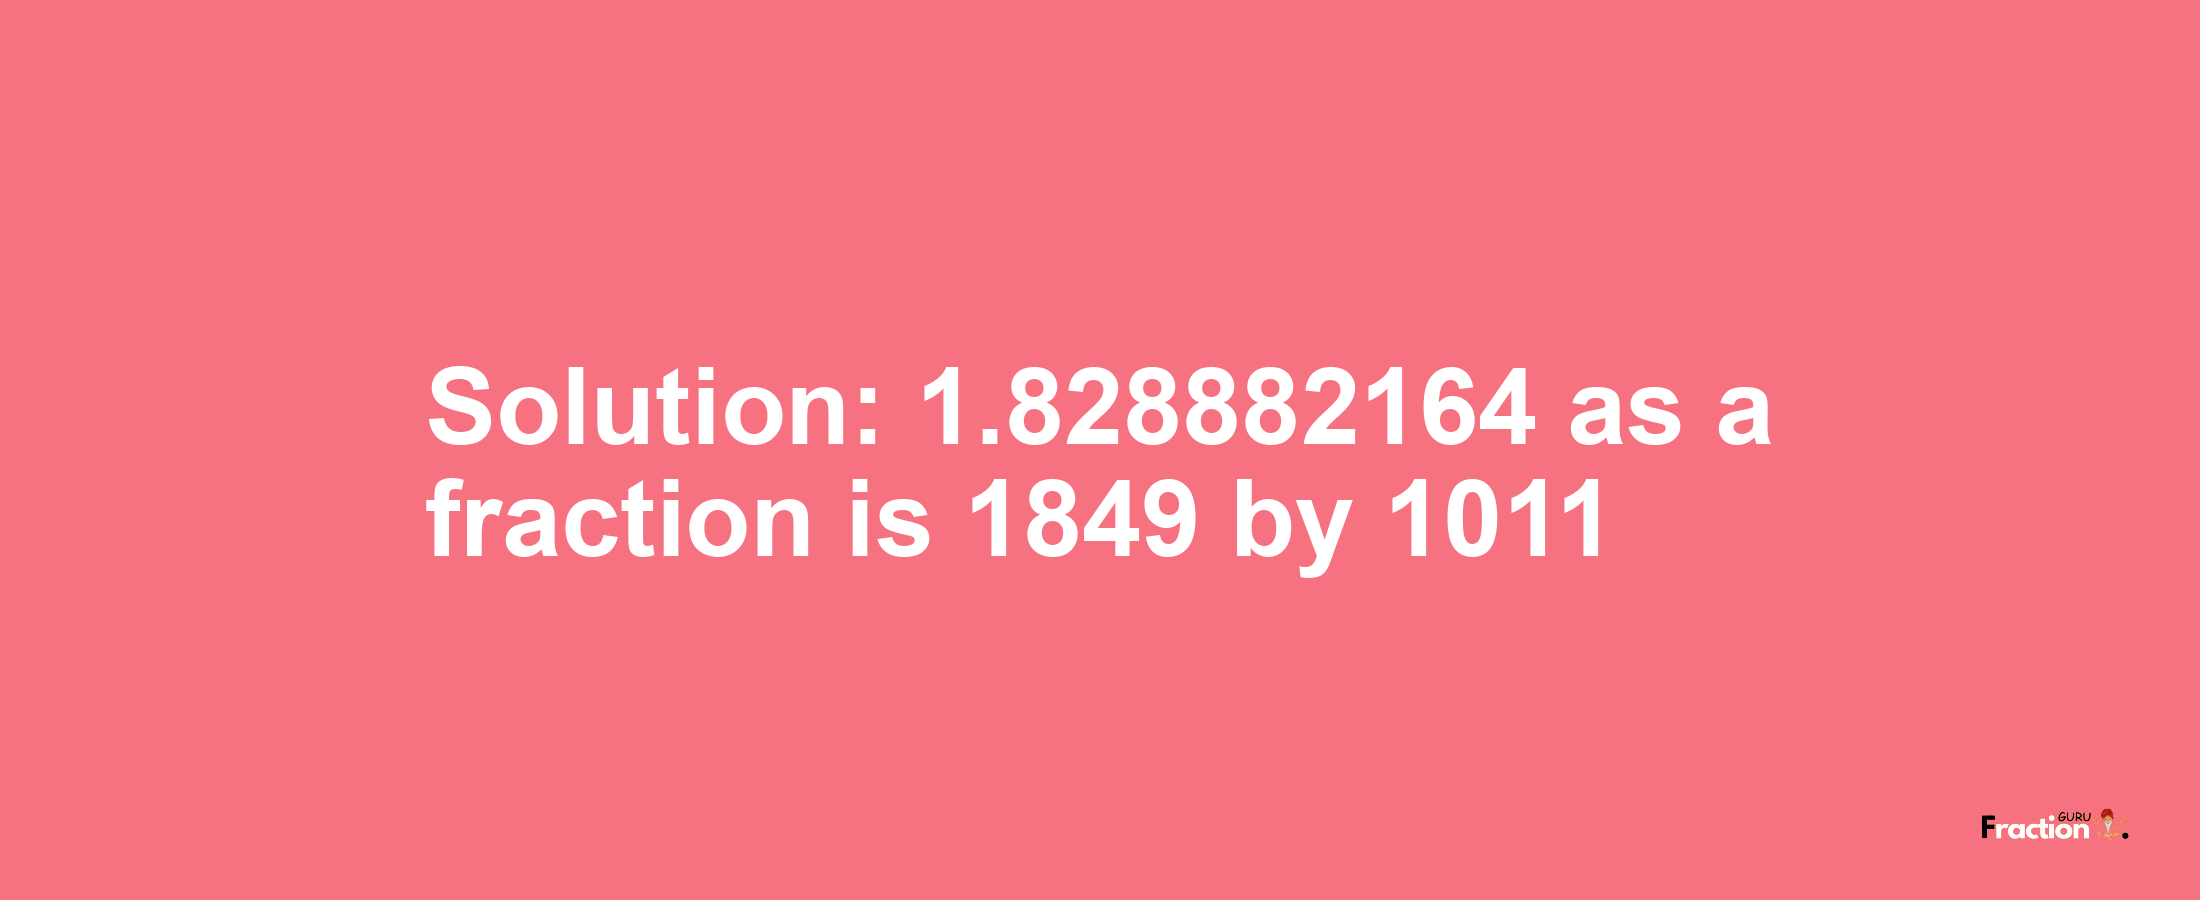 Solution:1.828882164 as a fraction is 1849/1011